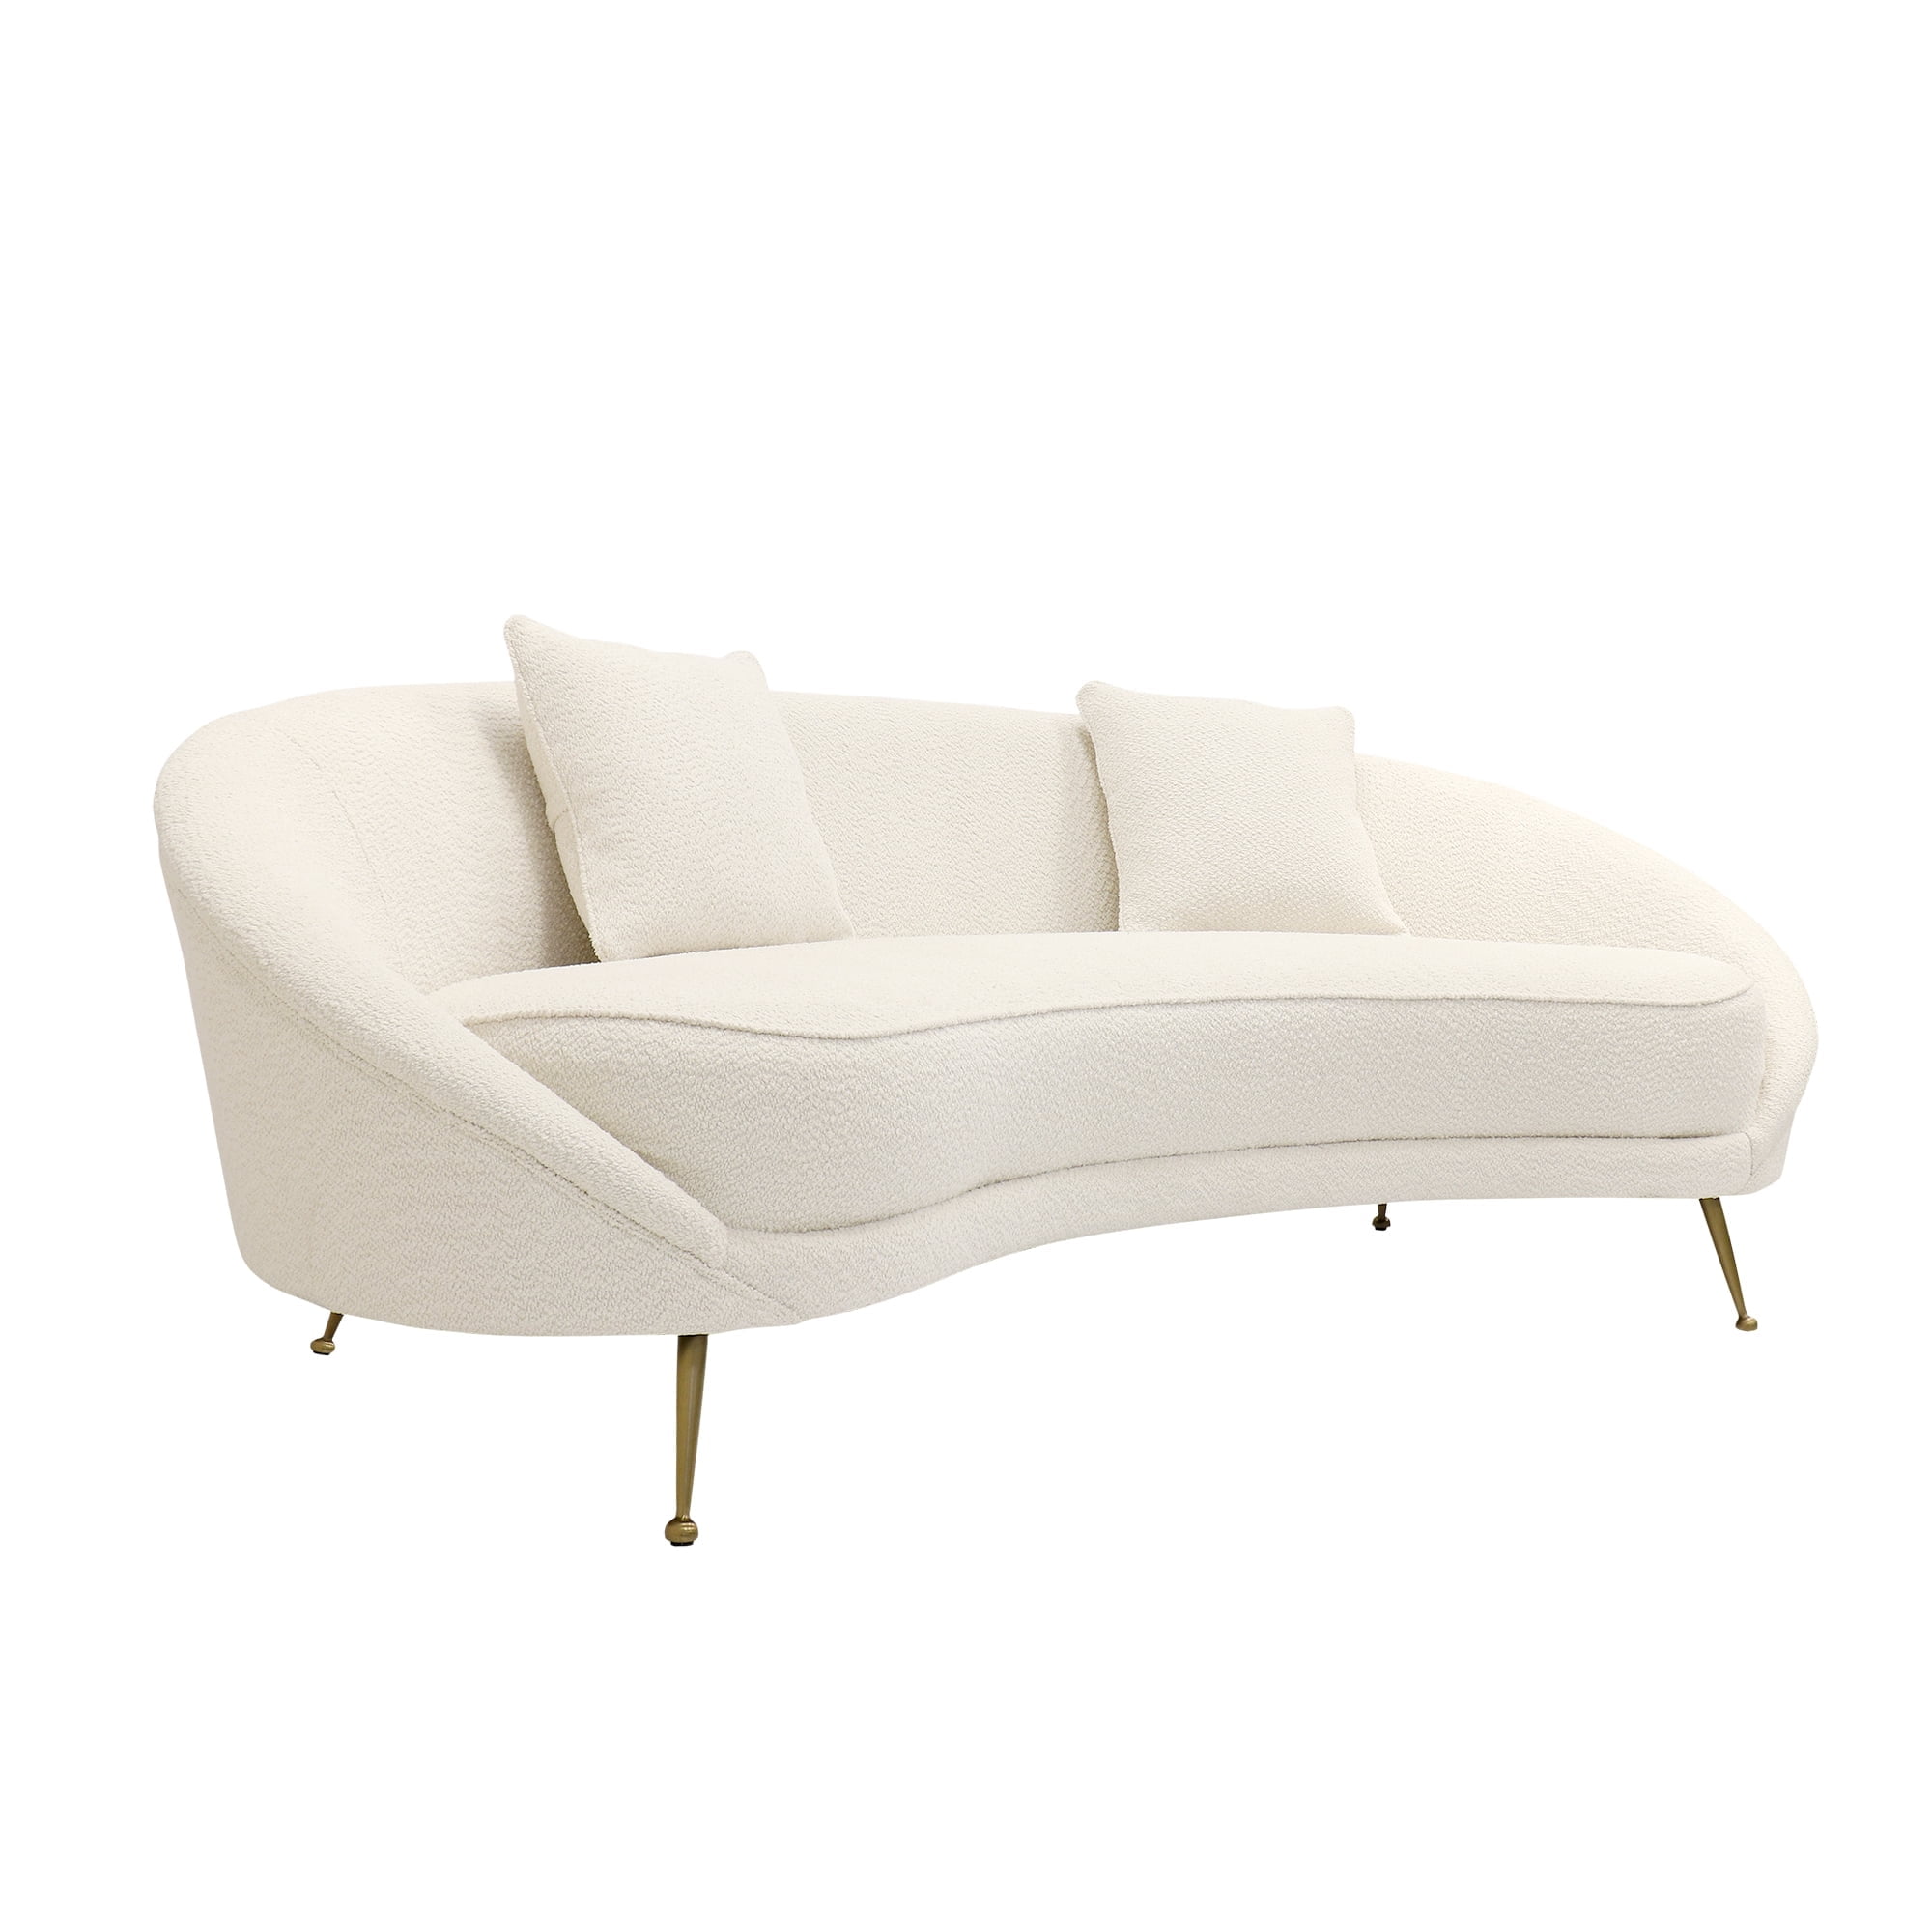 Pasargad Home Luna Collection Textured Fabric Curved Sofa, Ivory - image 1 of 10